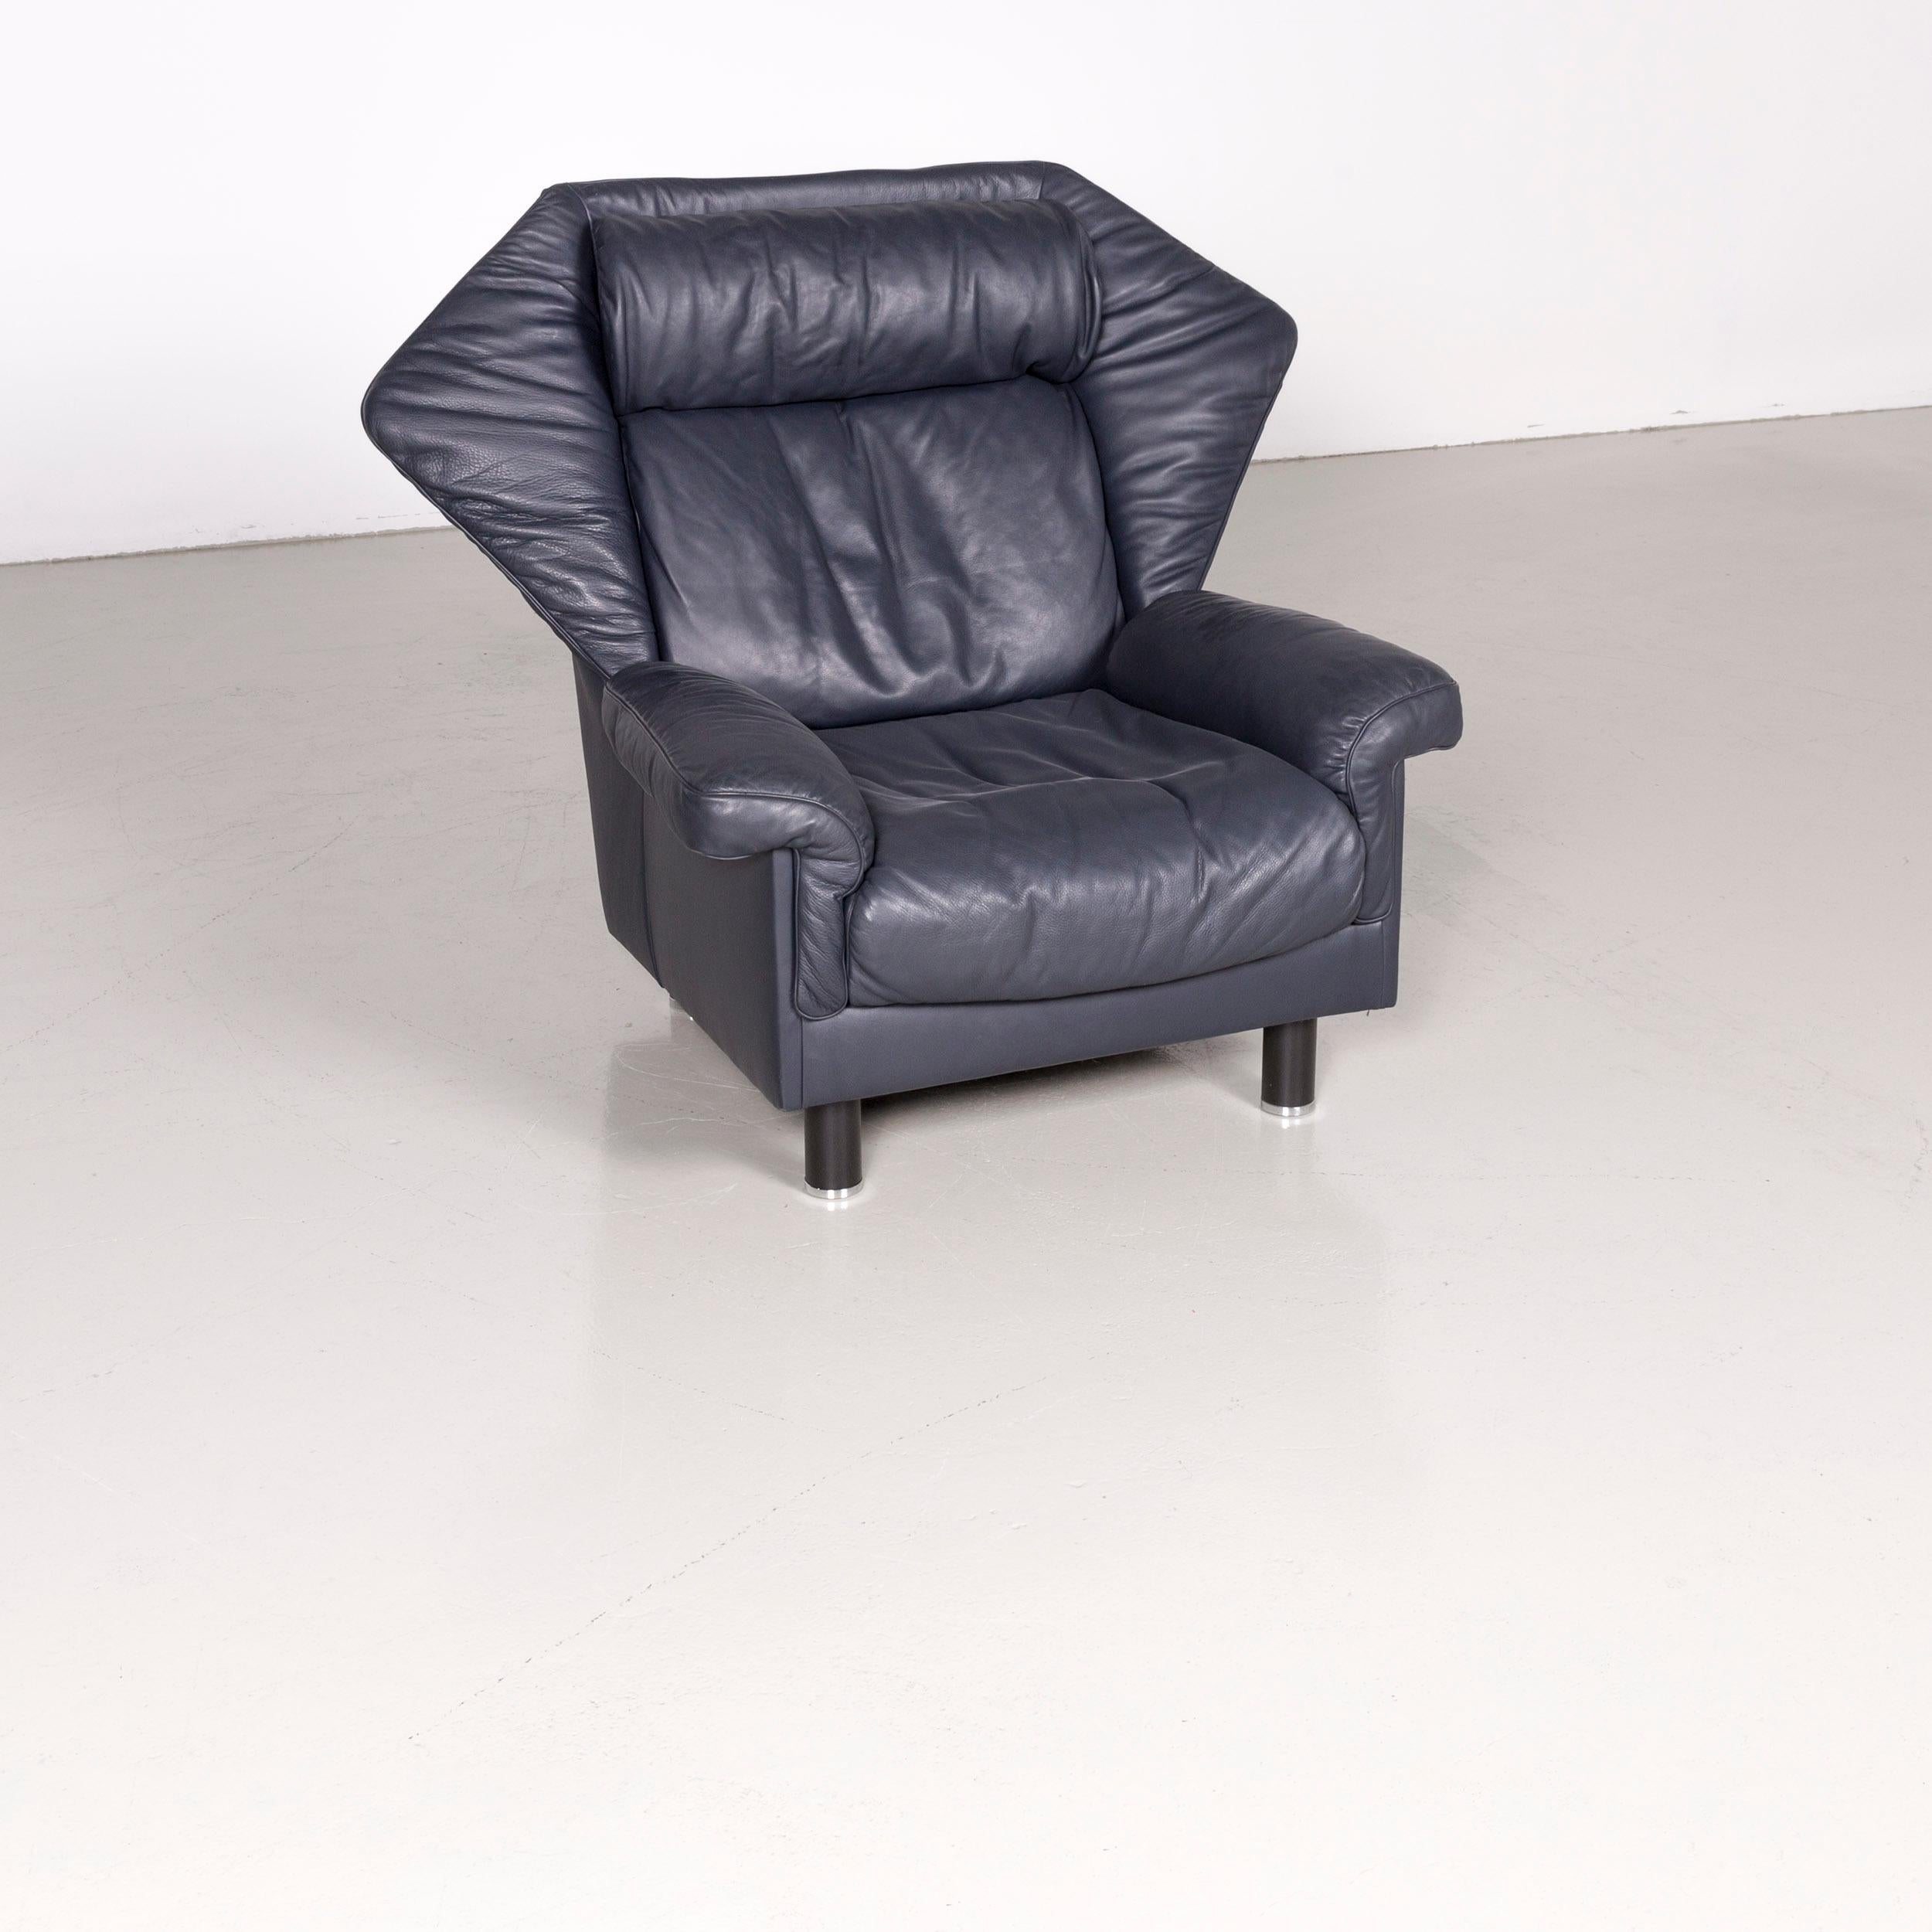 We bring to you a De Sede DS 24 designer leather armchair blue genuine leather chair.

Product measurements in centimeters:

Depth 80
Width 85
Height 100
Seat-height 45
Rest-height 55
Seat-depth 55
Seat-width 45
Back-height 70.

 